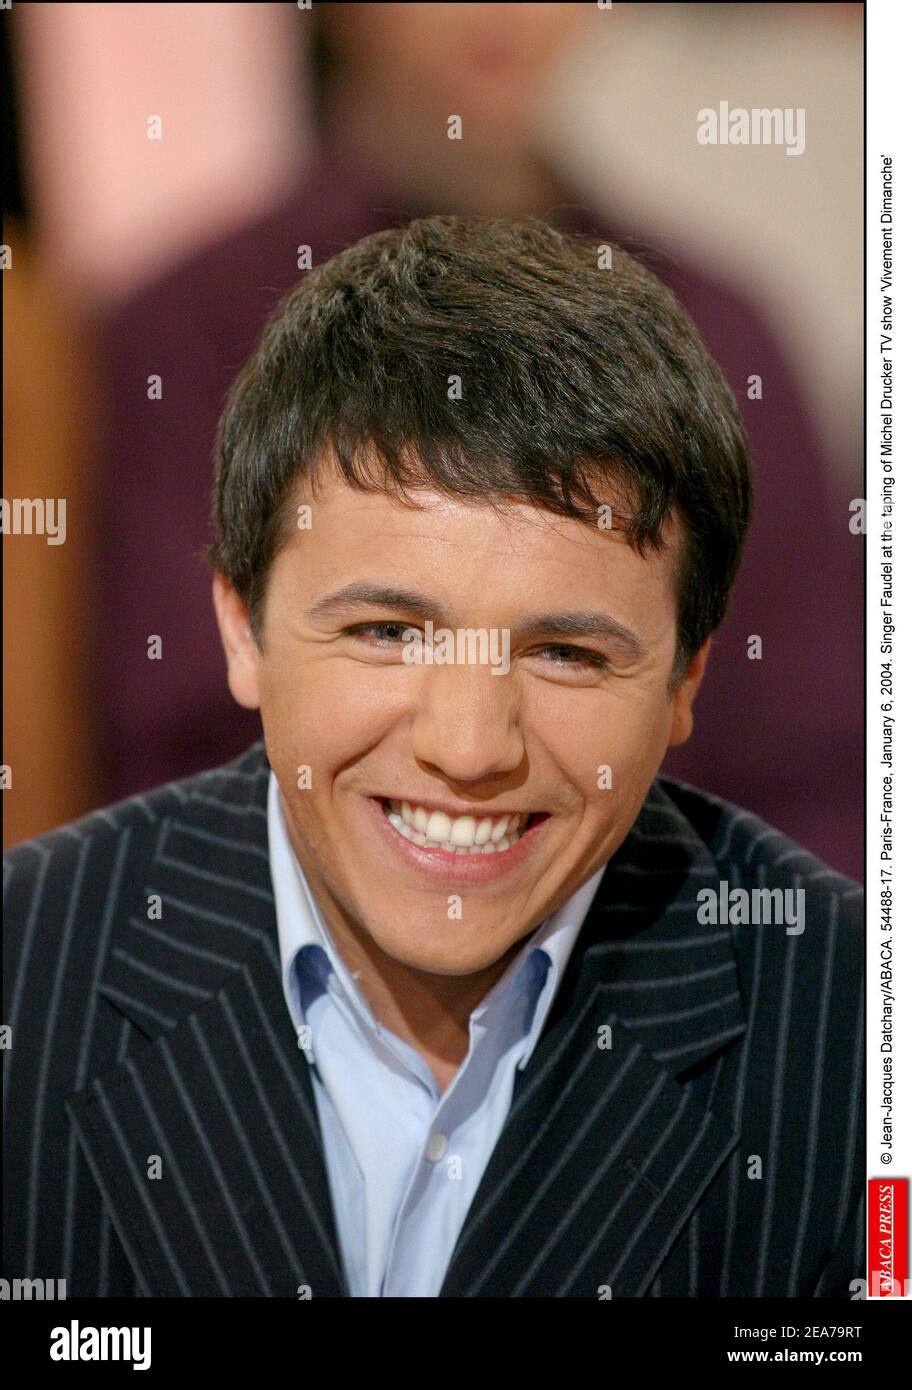 © Jean-Jacques Datchary/ABACA. 54488-17. Paris-France, January 6, 2004. Singer Faudel at the taping of Michel Drucker TV show 'Vivement Dimanche' Stock Photo